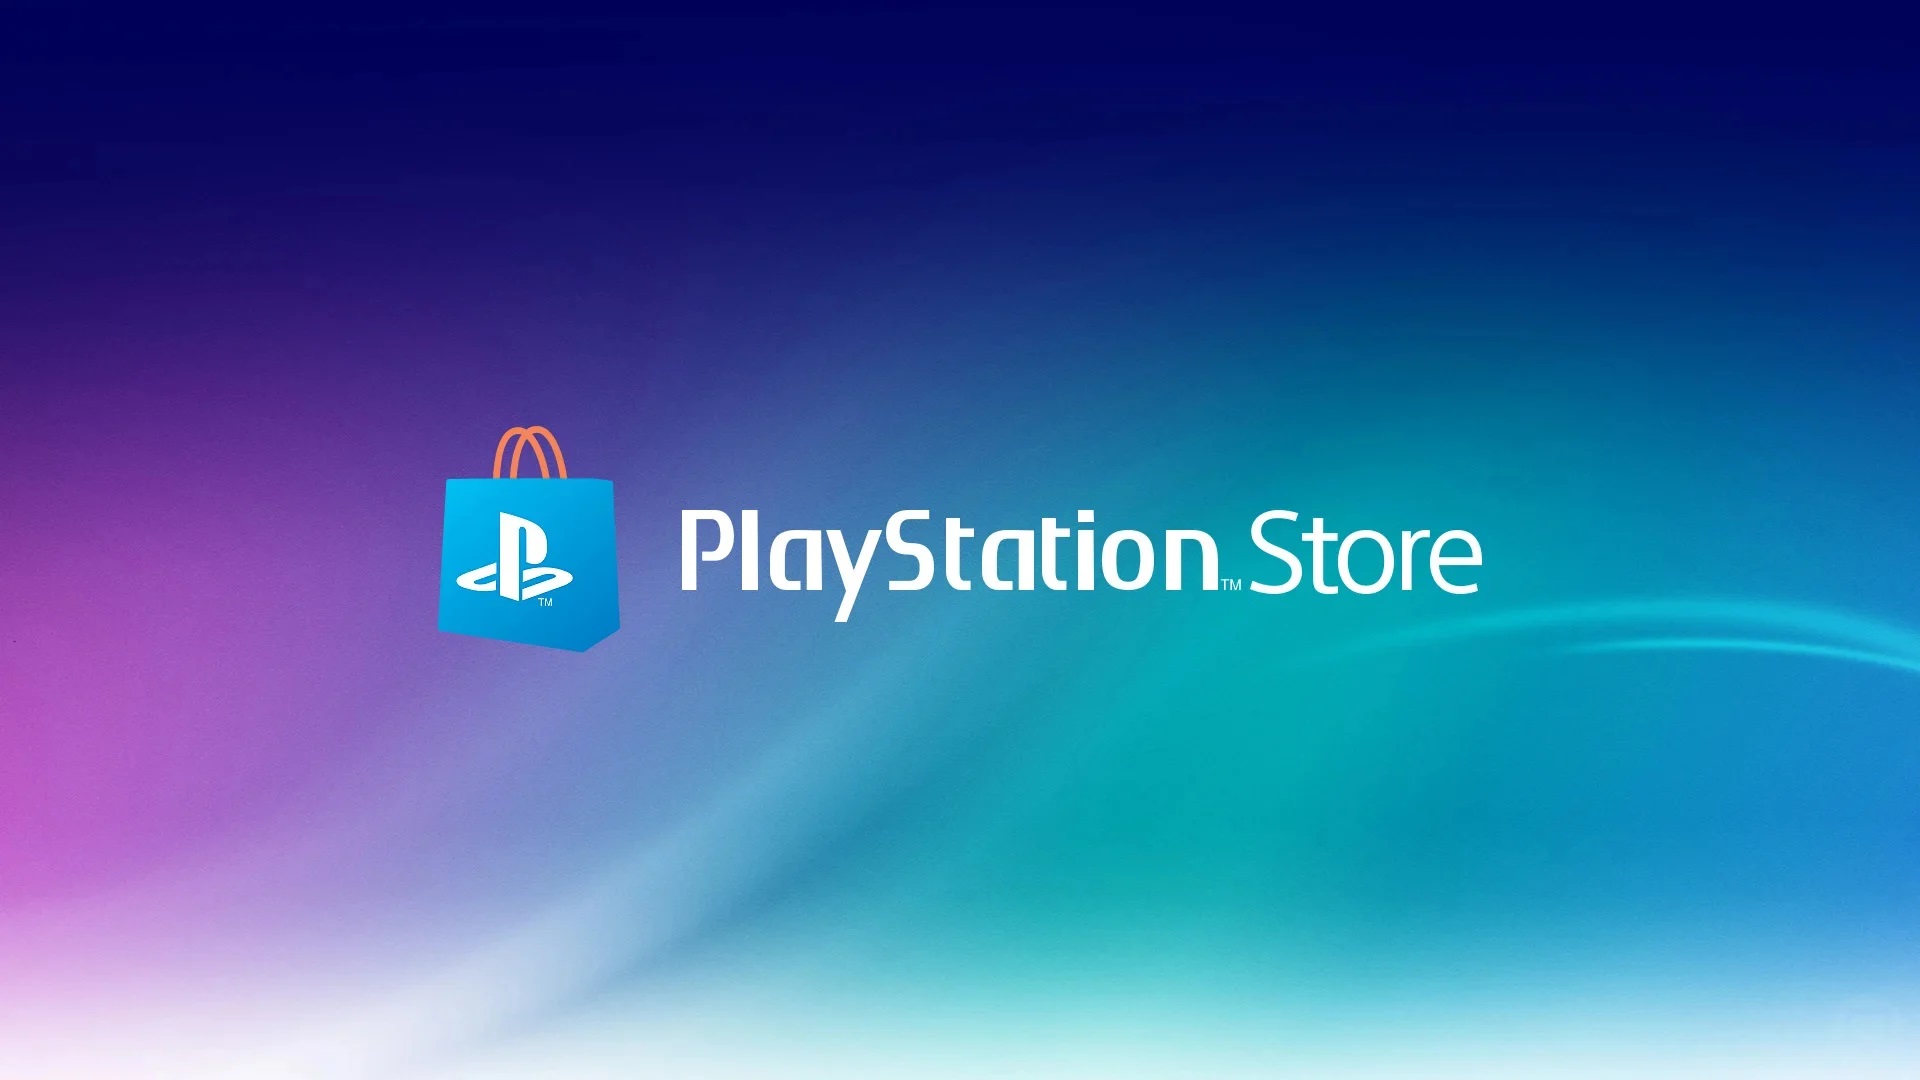 Playstation Store graphic